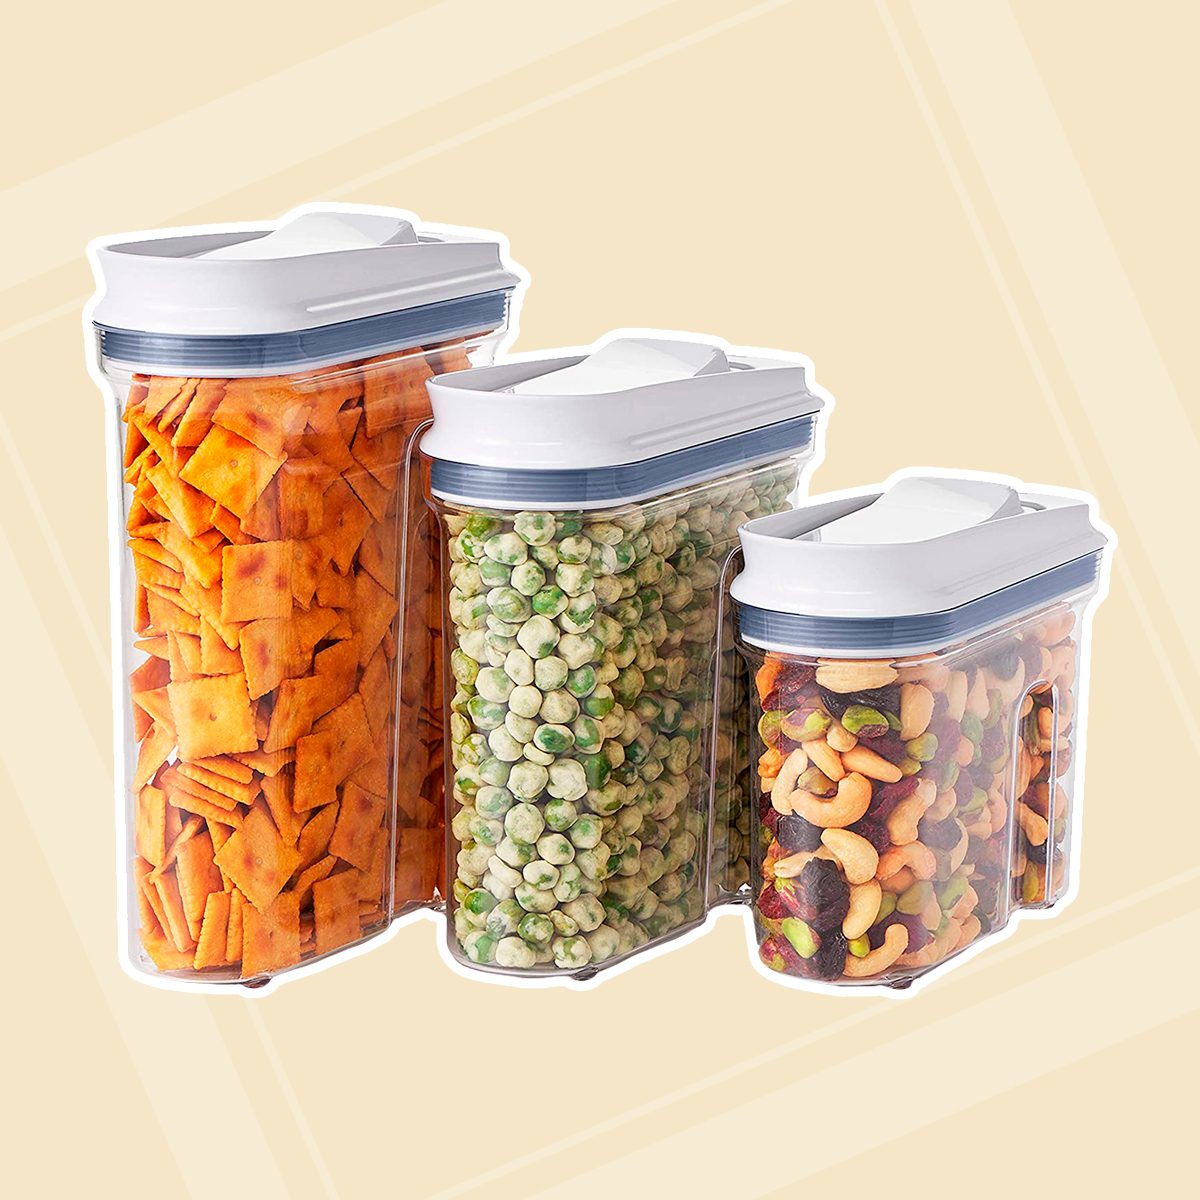 Food Storage Container Set for Baking Ingredients $19.99